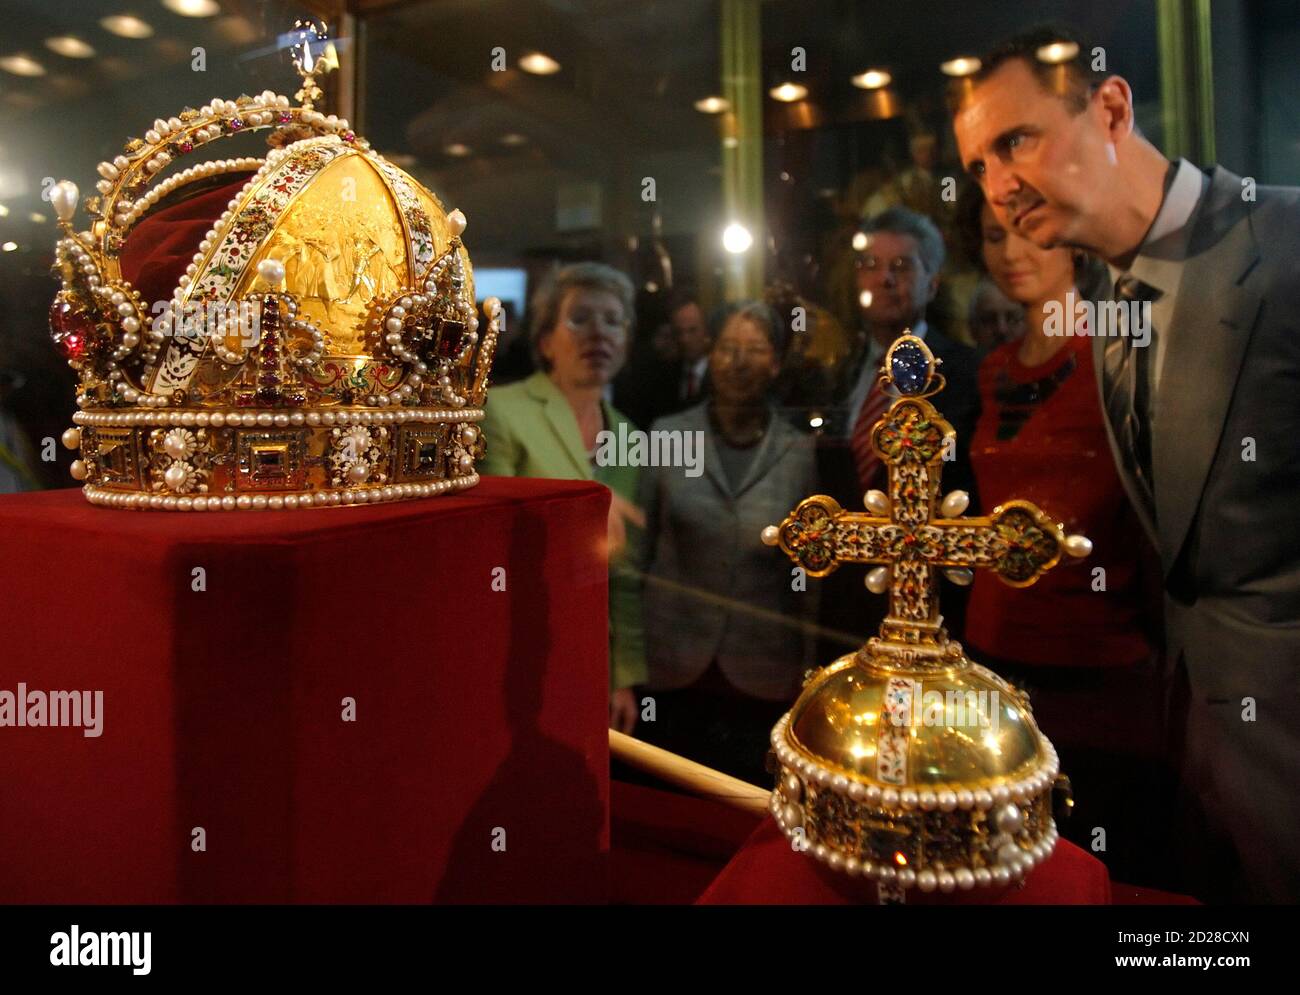 Syrian President Bashar al-Assad looks at the crown of former Austrian  Emperor Rudolf II during a visit in the 